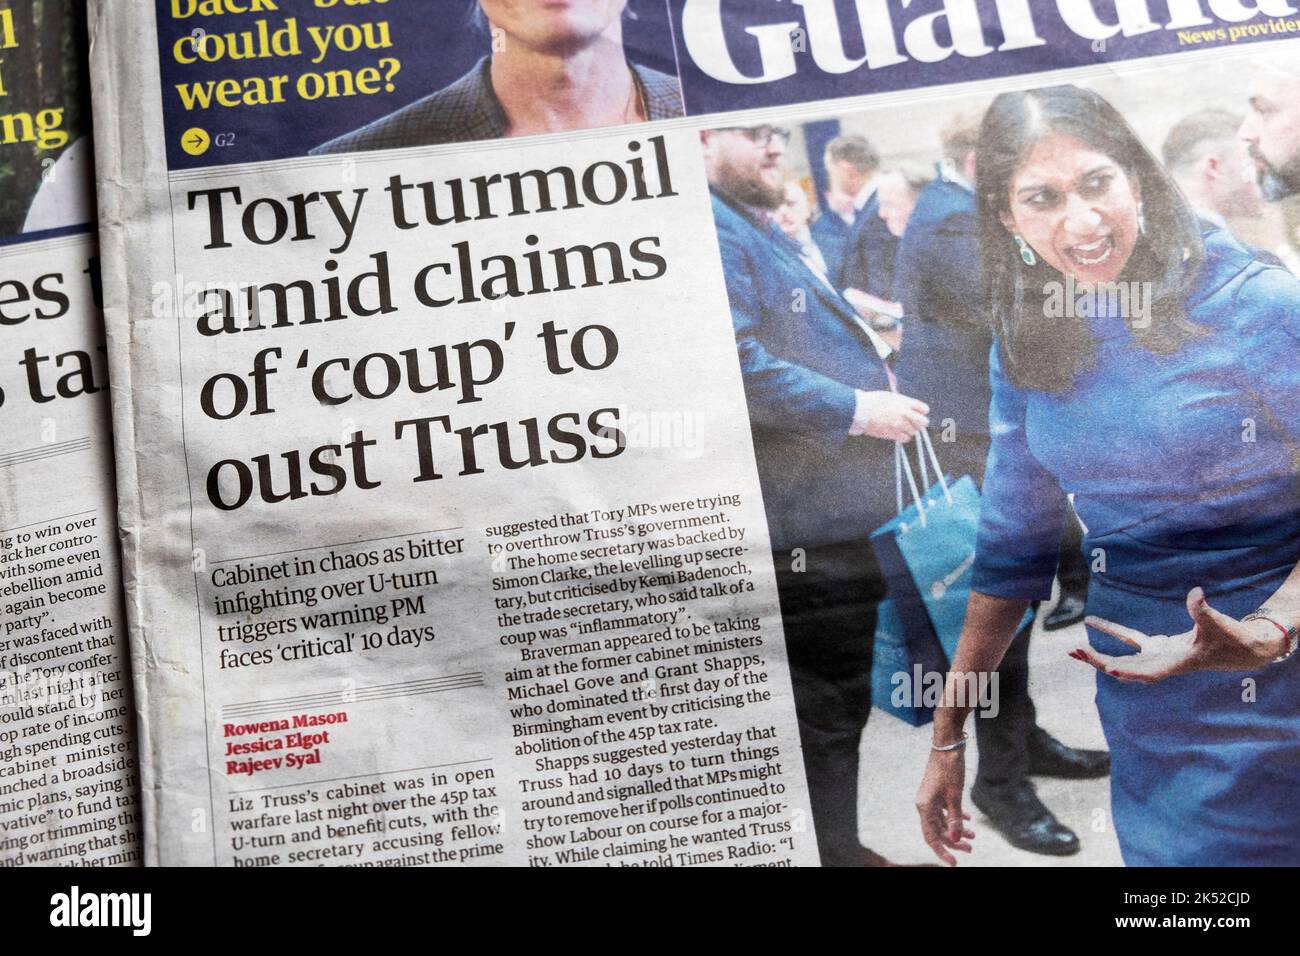 'Tory turmoil amid claims of 'coup' to oust Truss' Guardian newspaper headline Conservative Party Conference Liz Truss PM article 2022 UK Stock Photo